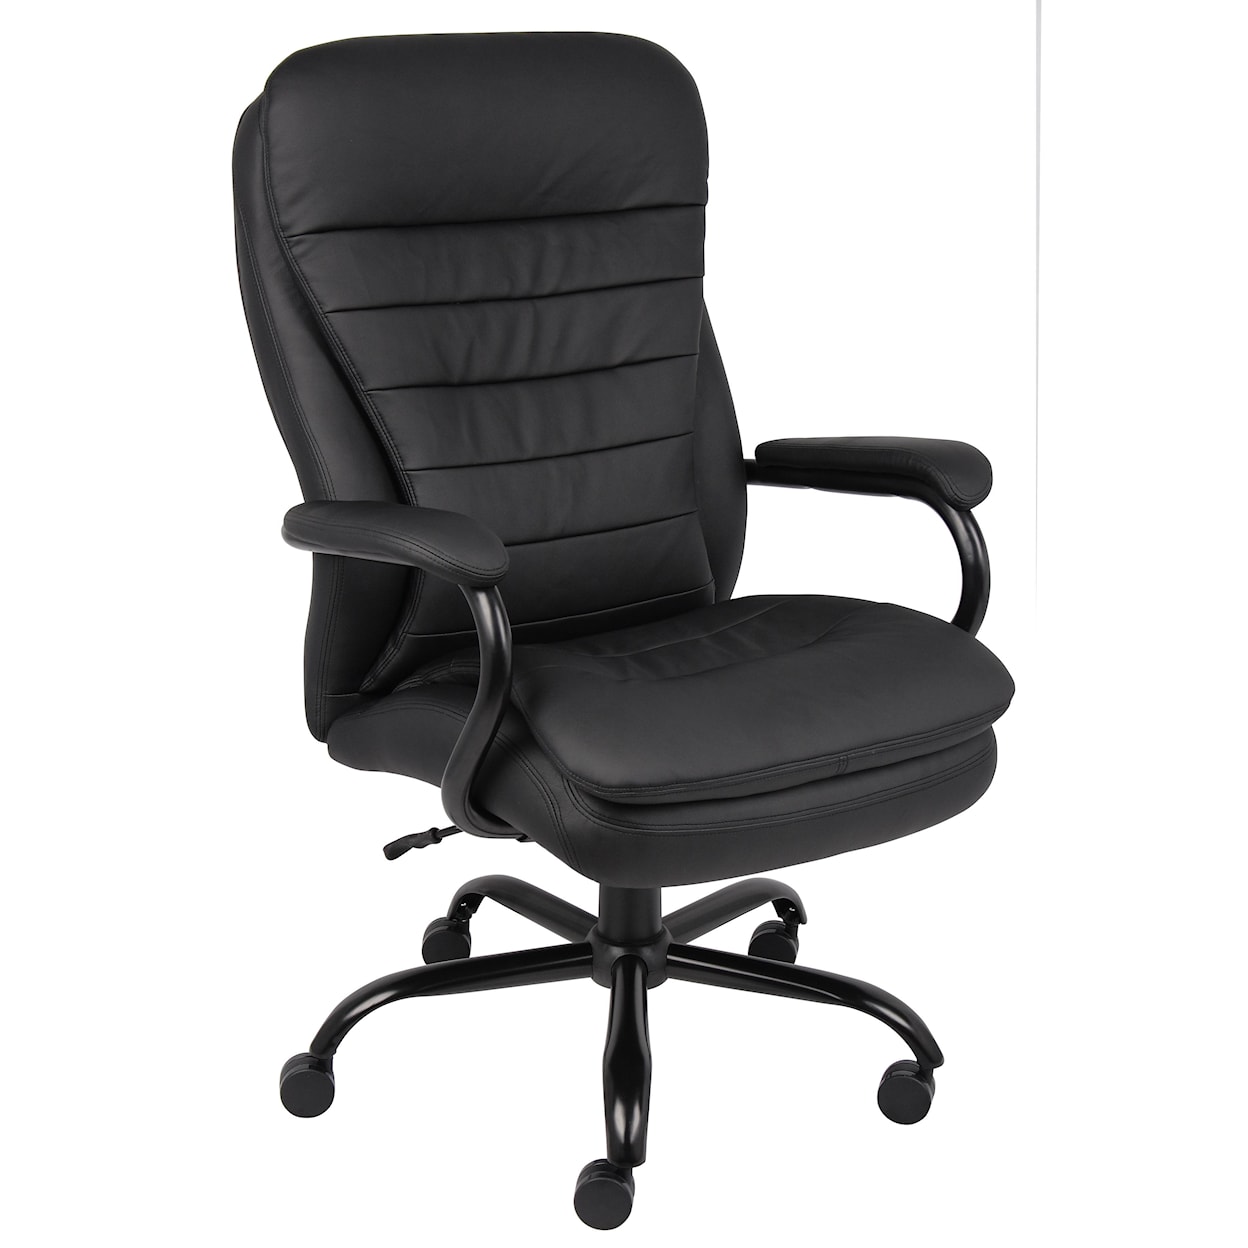 Presidential Seating Executive Chairs Heavy Duty Black Executive Chair